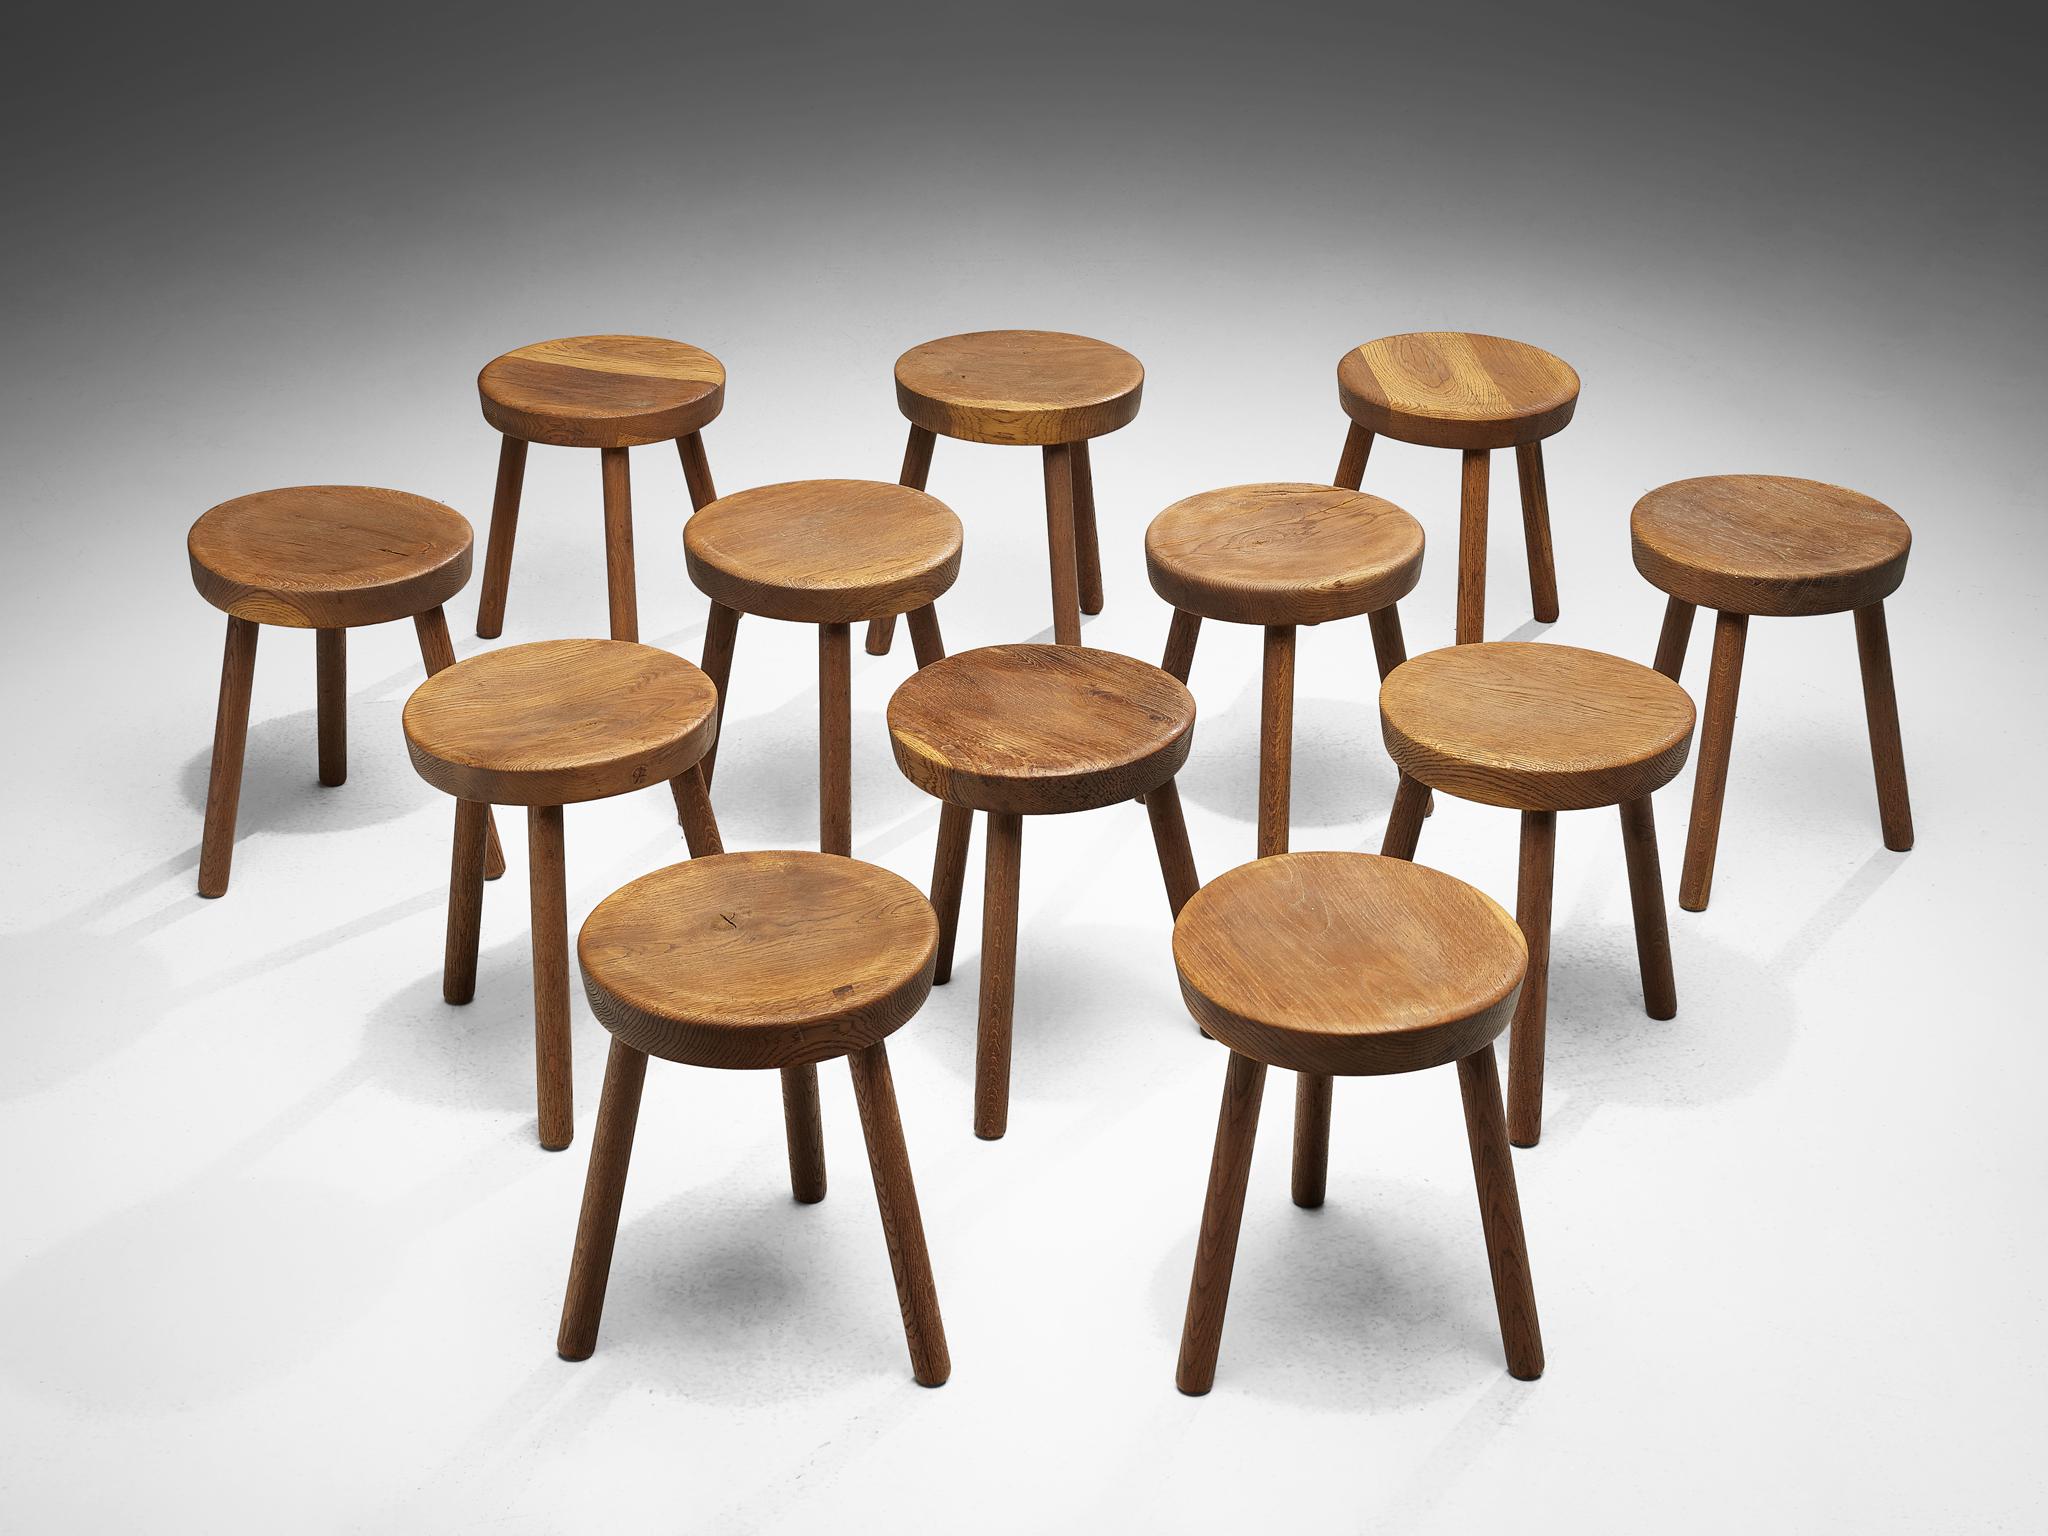 Tripod stools or side tables, solid oak, Switzerland, 1960s-1970s.

Beautiful crafted oak stools originating from the exhibition center in St. Gallen, Switzerland. The seat is handcrafted to have a small dip for better comfort. With their simple